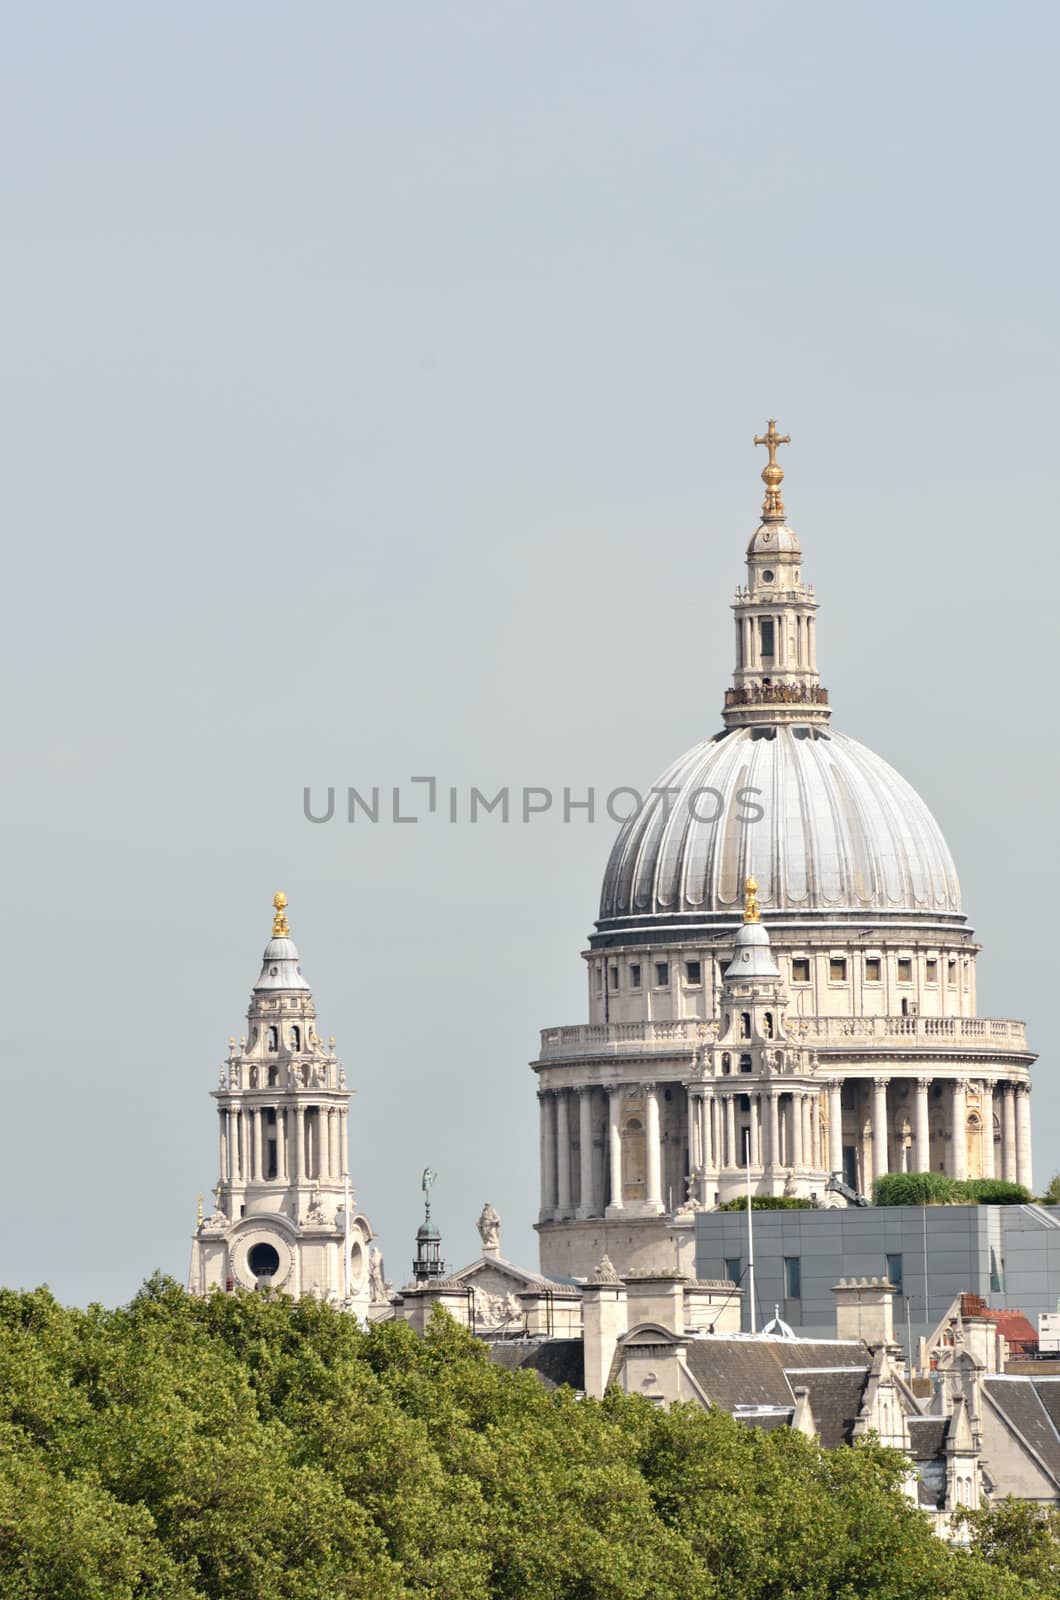 St pauls dome by pauws99